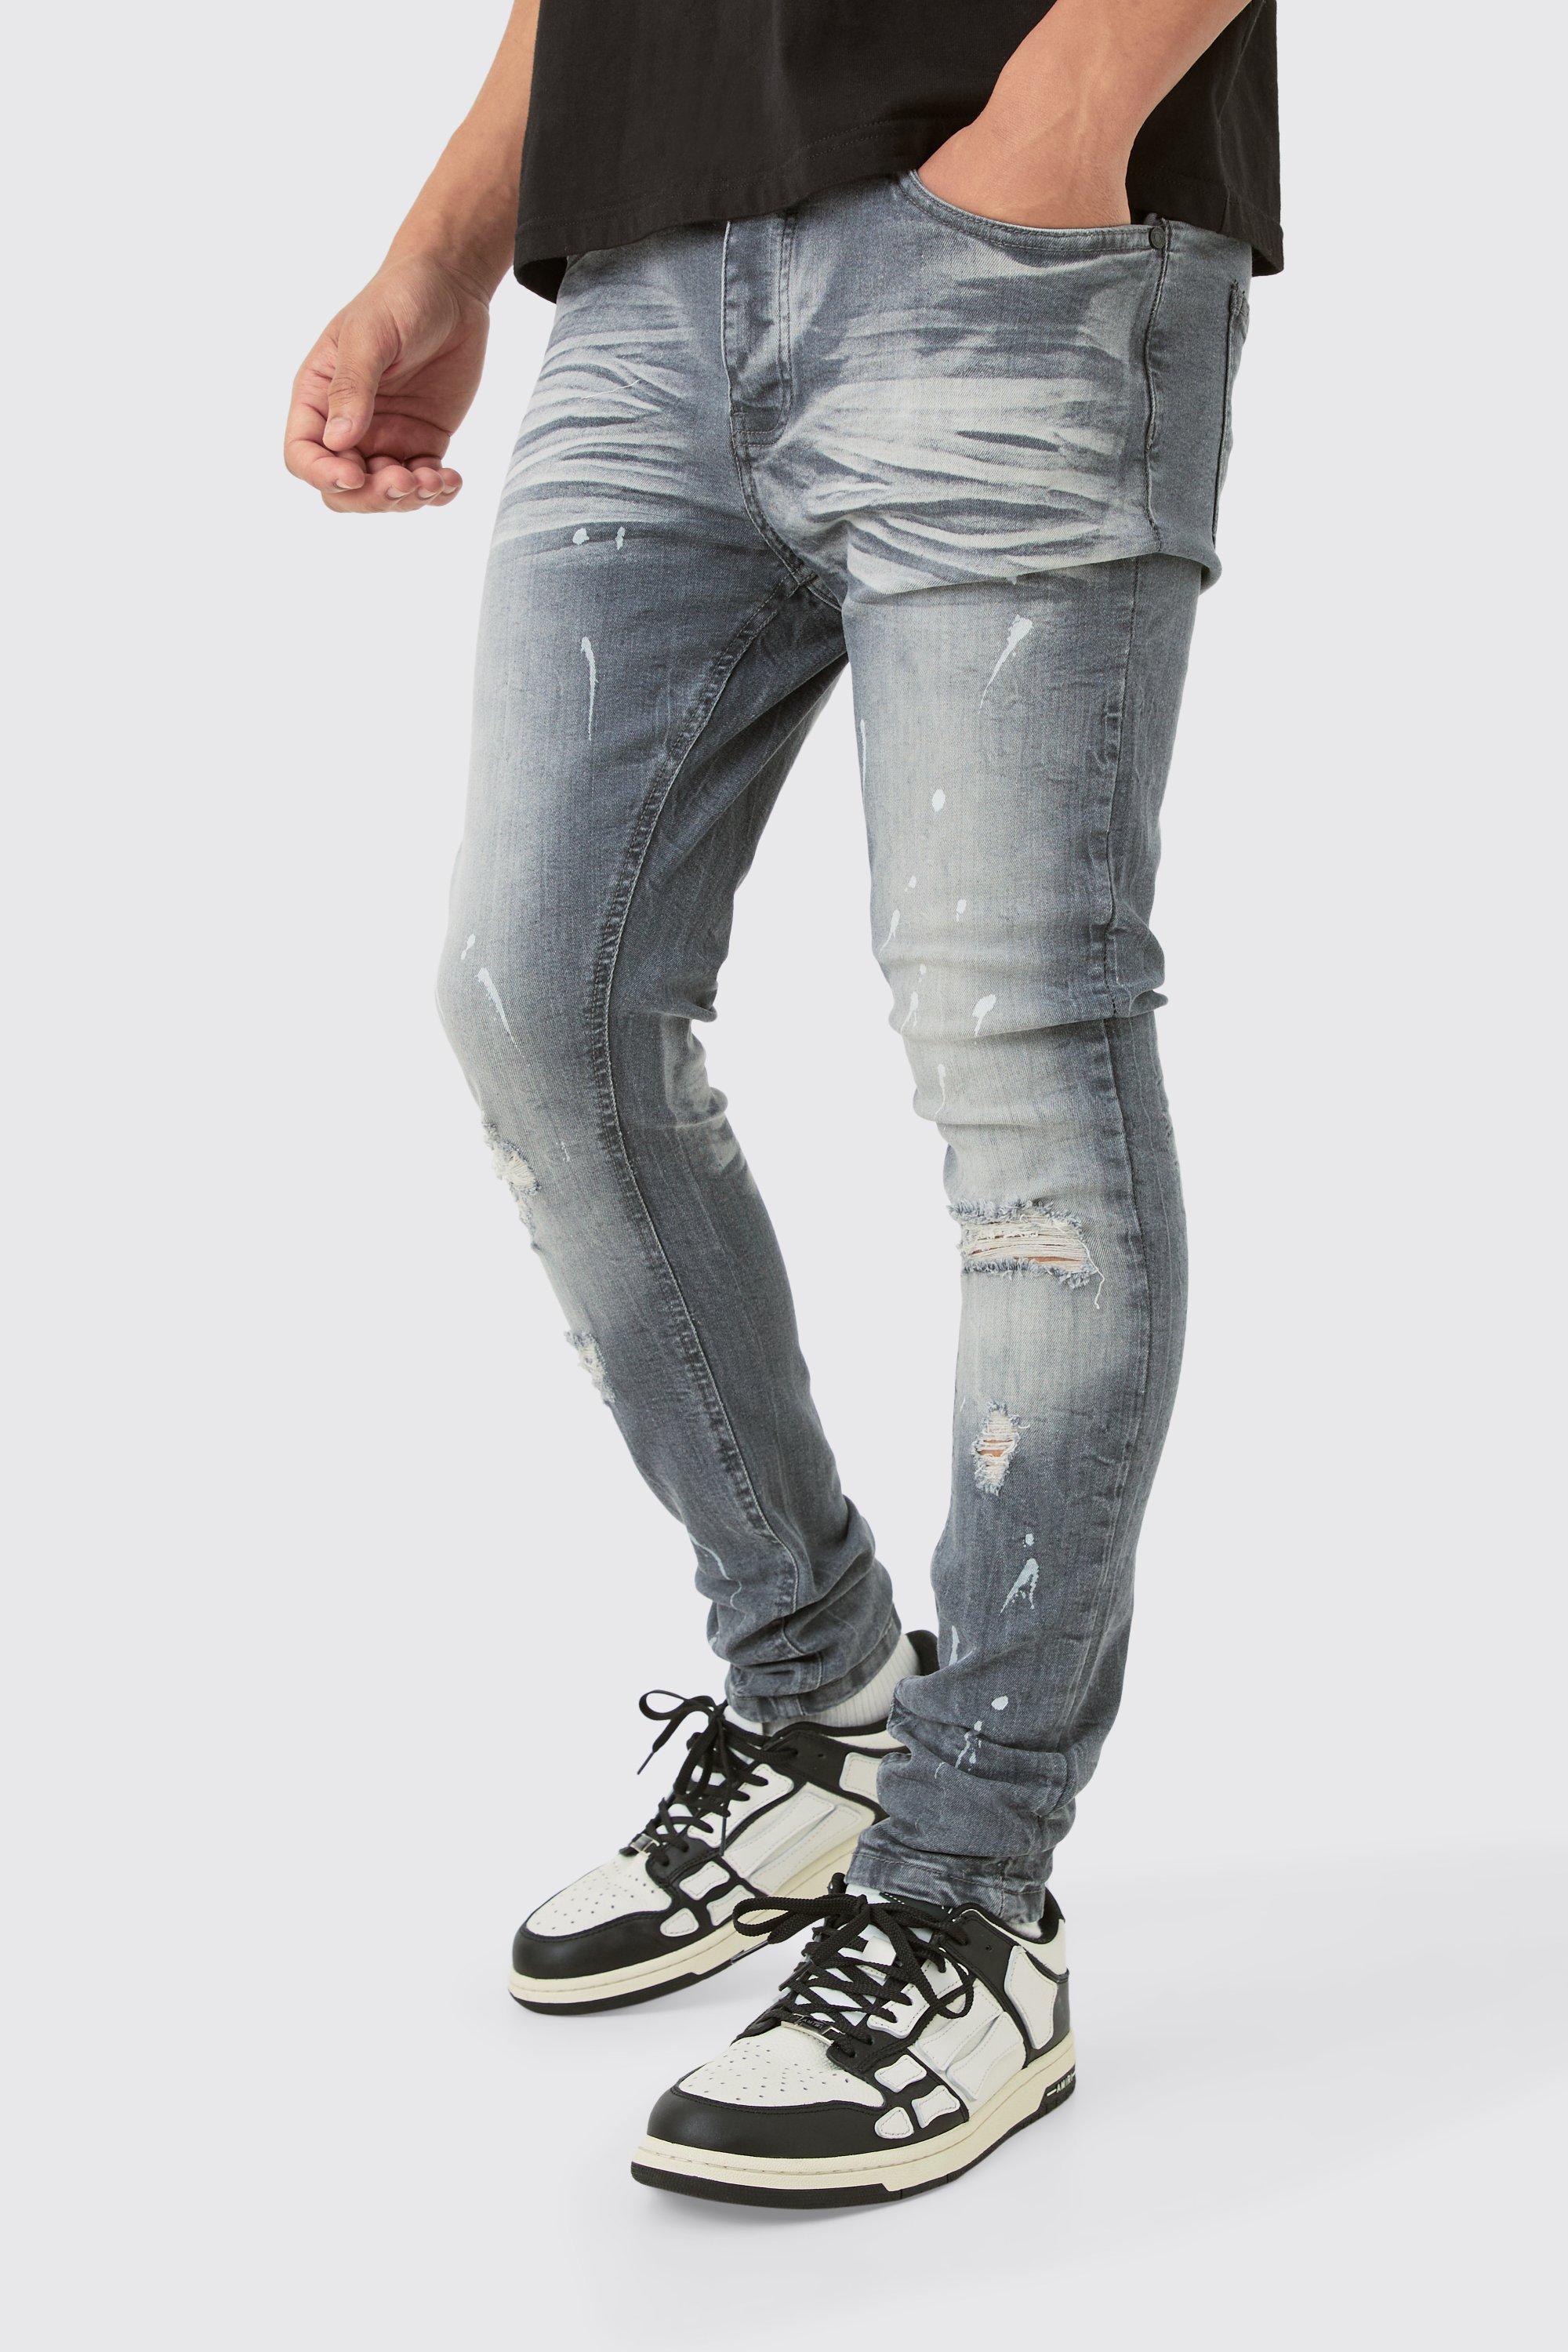 Image of Super Skinny Stretch Ripped Jean In Dirty Wash, Grigio